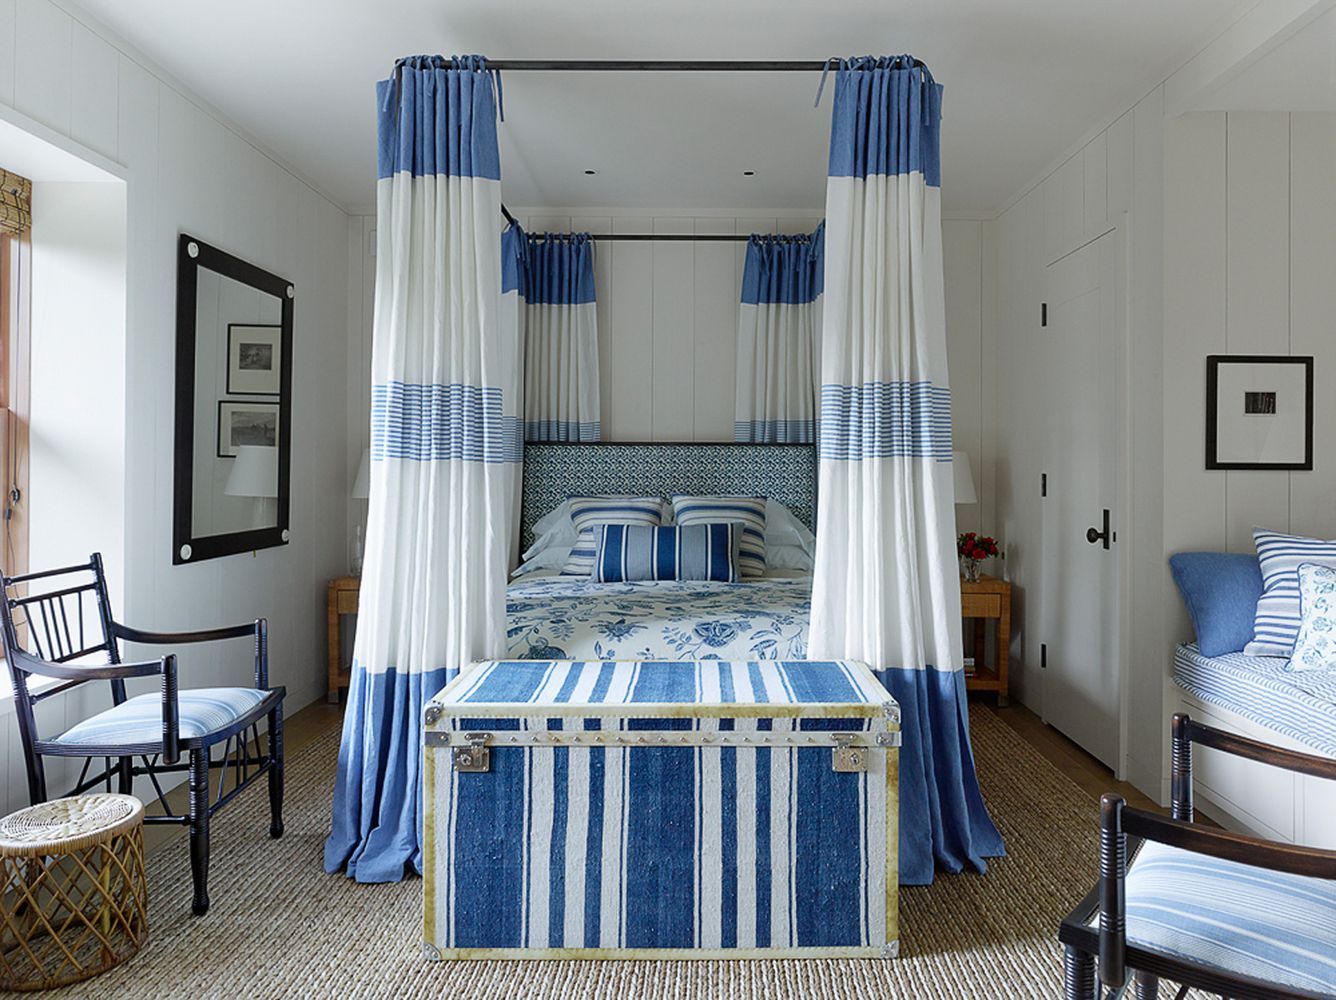 Nautical Bedroom Decor Blue Striped Canopy Bed Curtains via Mark D. Sikes